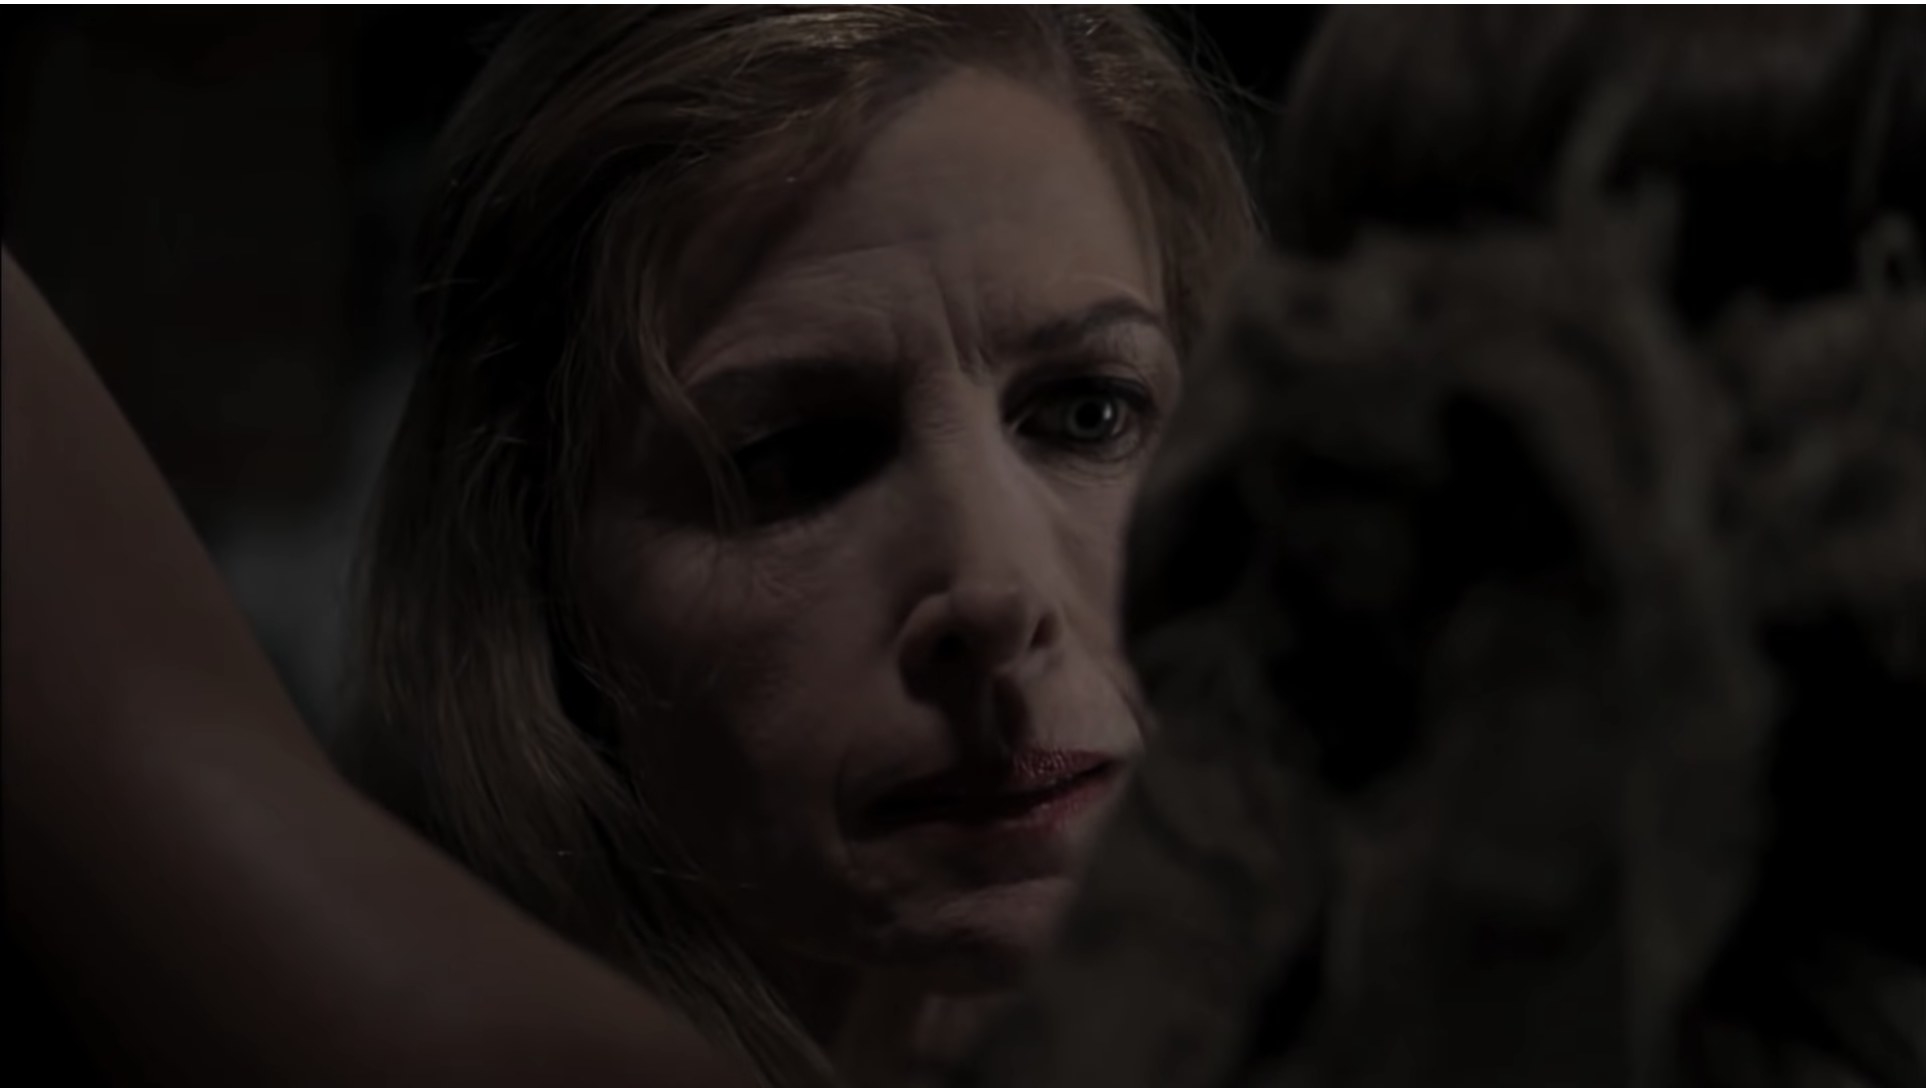 Still from the movie &quot;The Girl Next Door&quot; with actor Blanche Baker in the dark, looking menacingly at a woman who has been tied up